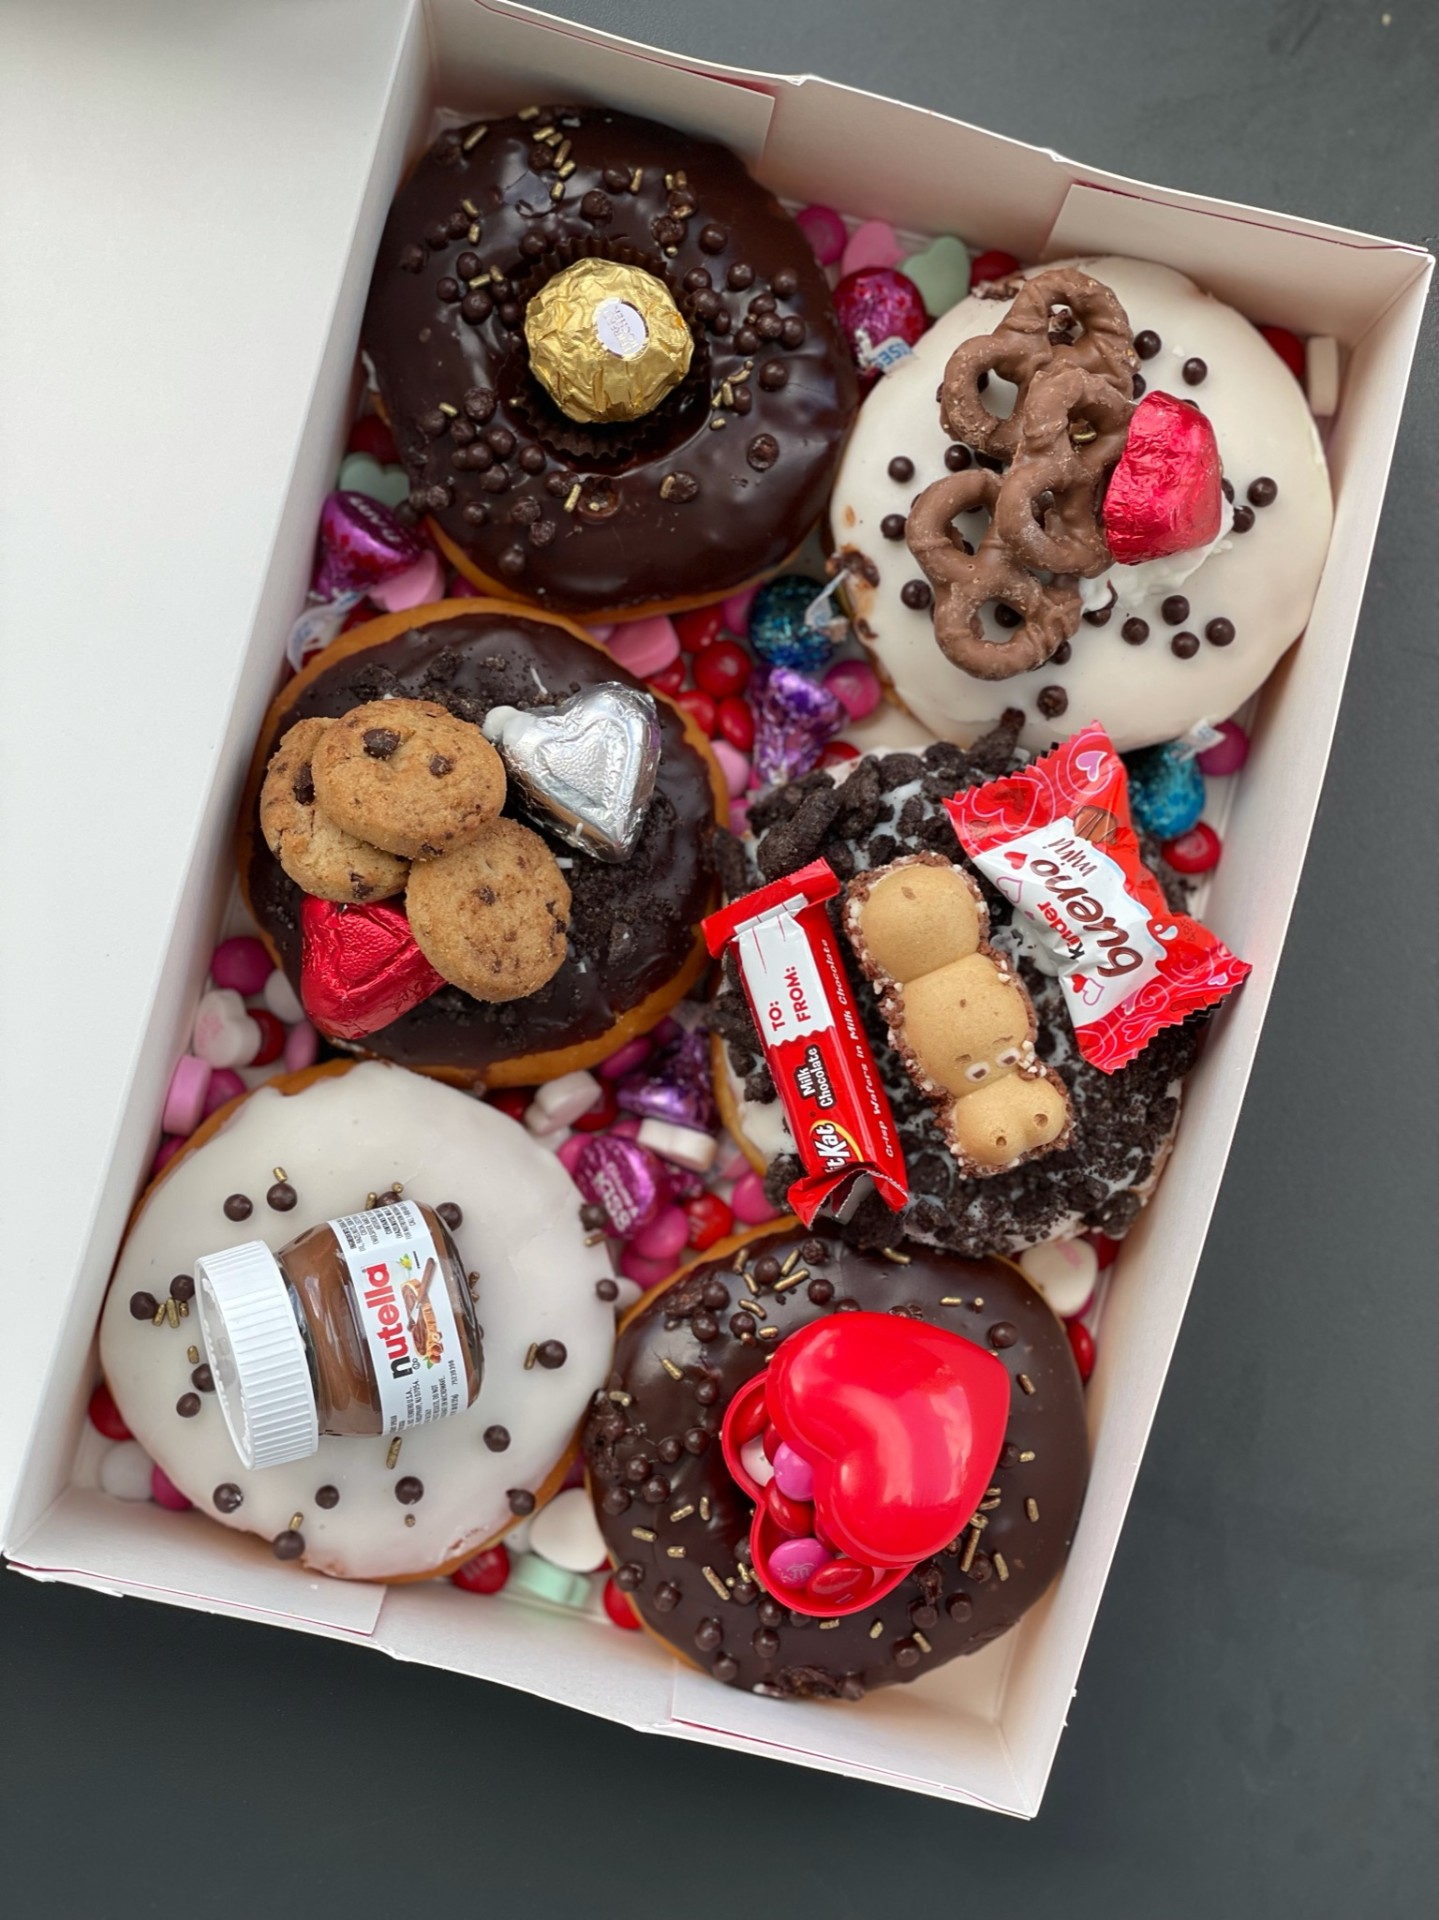 Donuts are the new candy with Yonutz Fantastical Donuts and Ice Cream